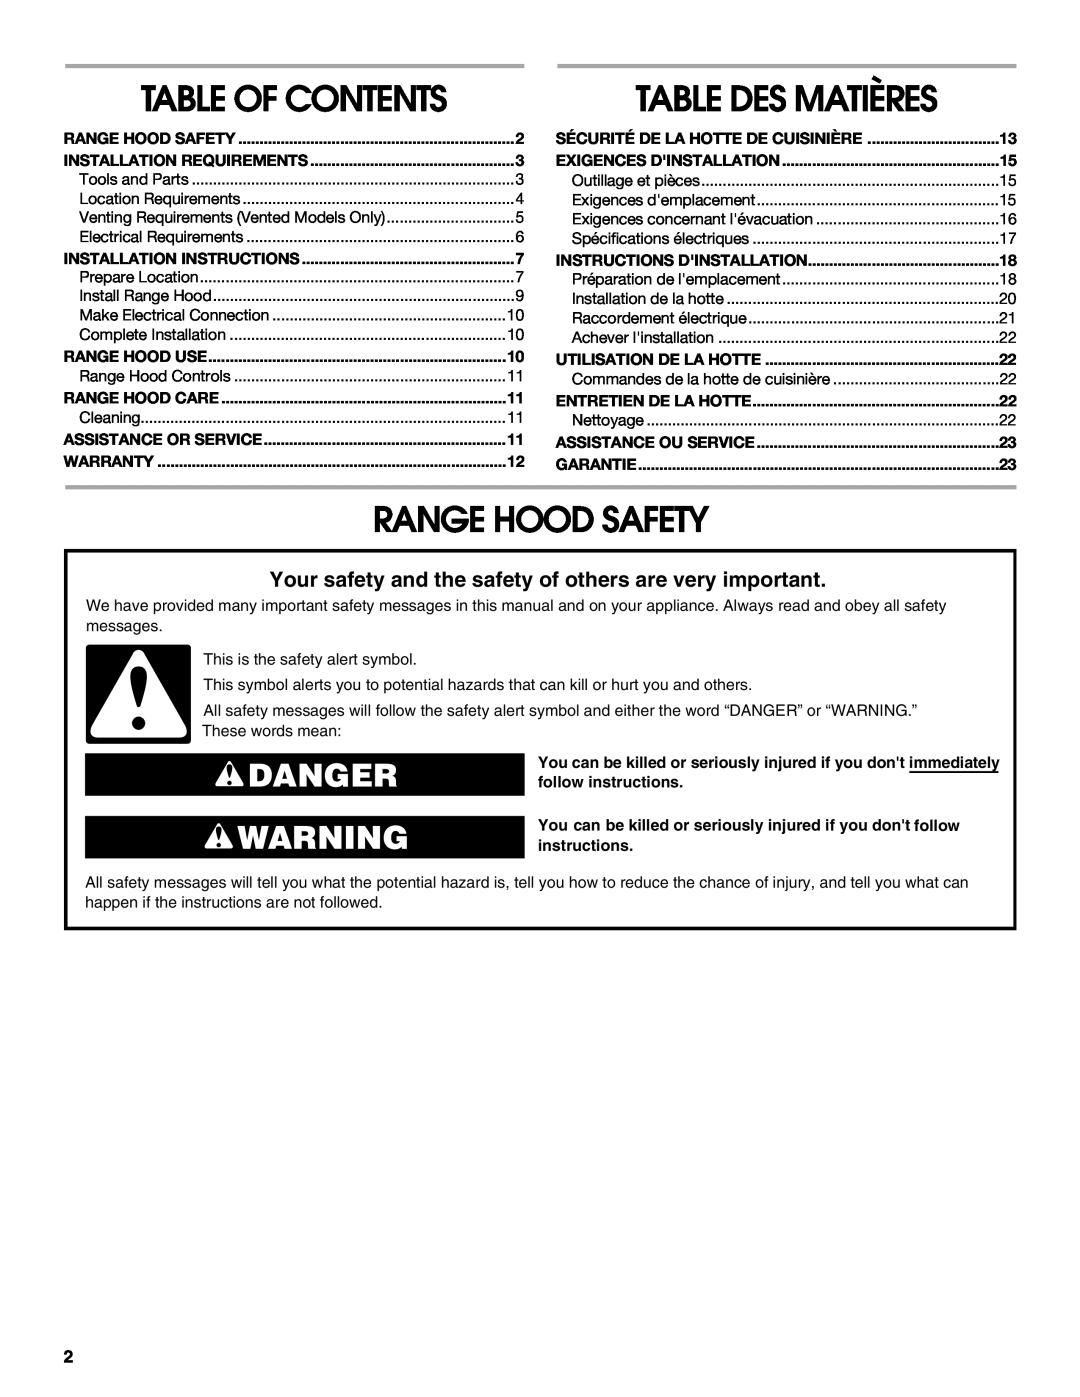 Whirlpool W10240546A Range Hood Safety, Table Des Matières, Danger, Installation Requirements, Installation Instructions 